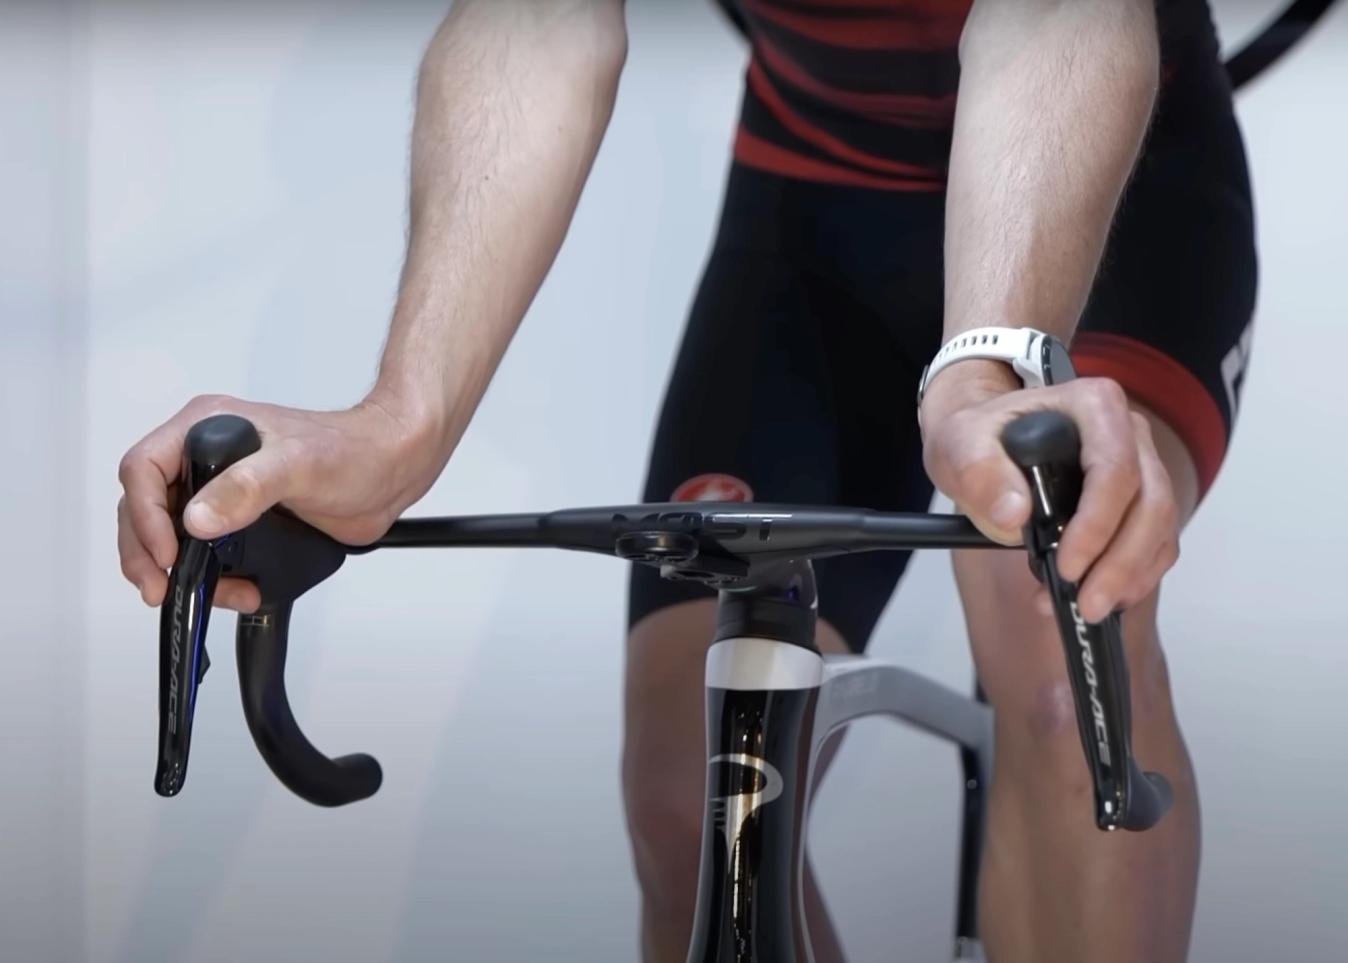 Rolling your wrists is a clear tell that the handlebars are too wide for a comfortable position.